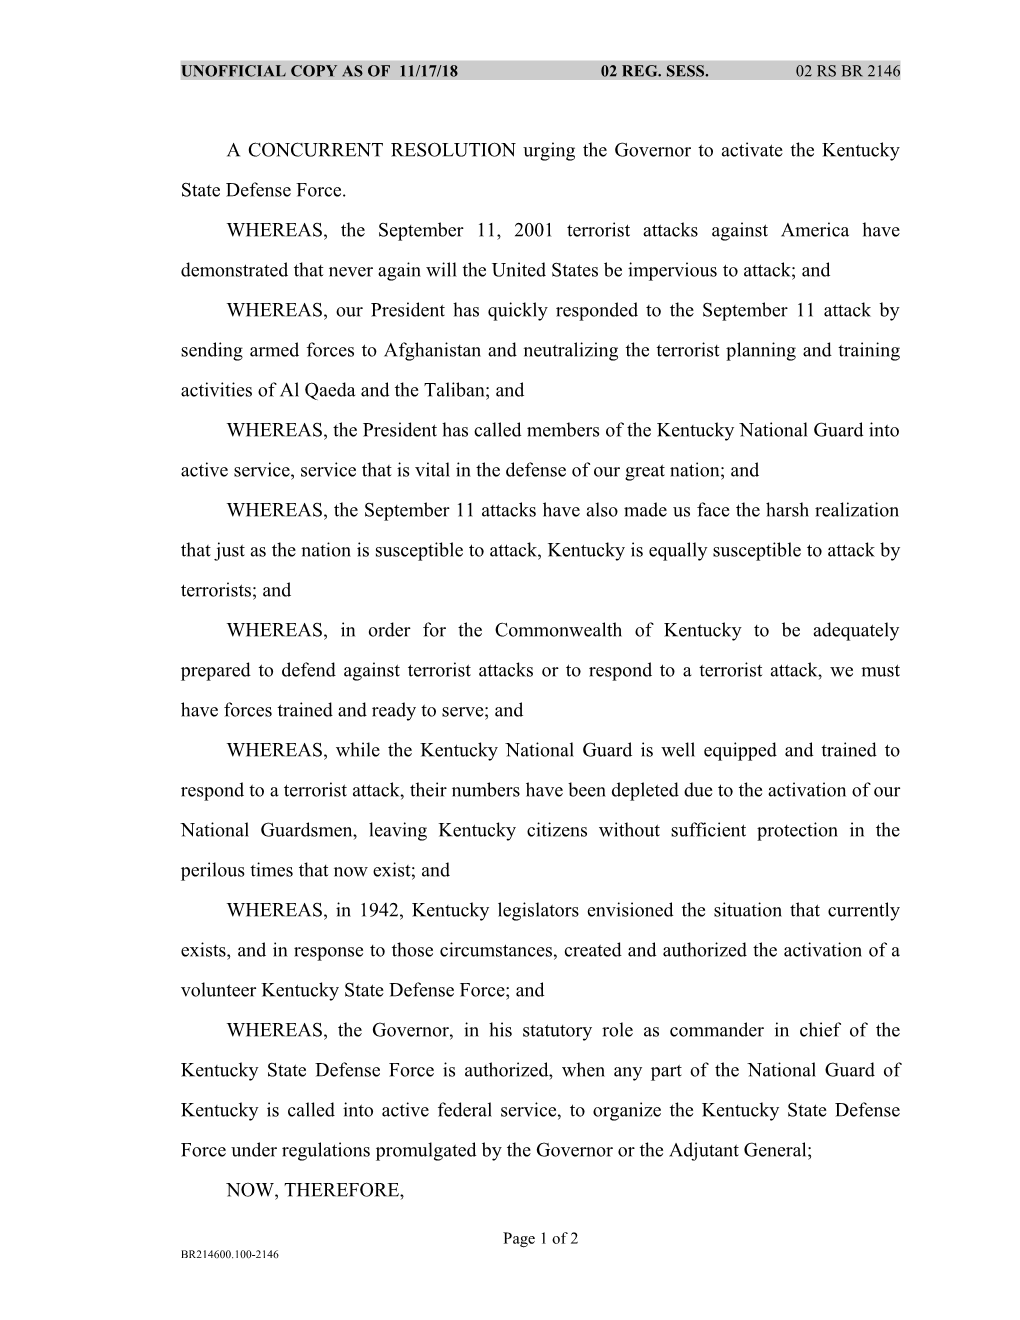 A CONCURRENT RESOLUTION Urging the Governor to Activate the Kentucky State Defense Force